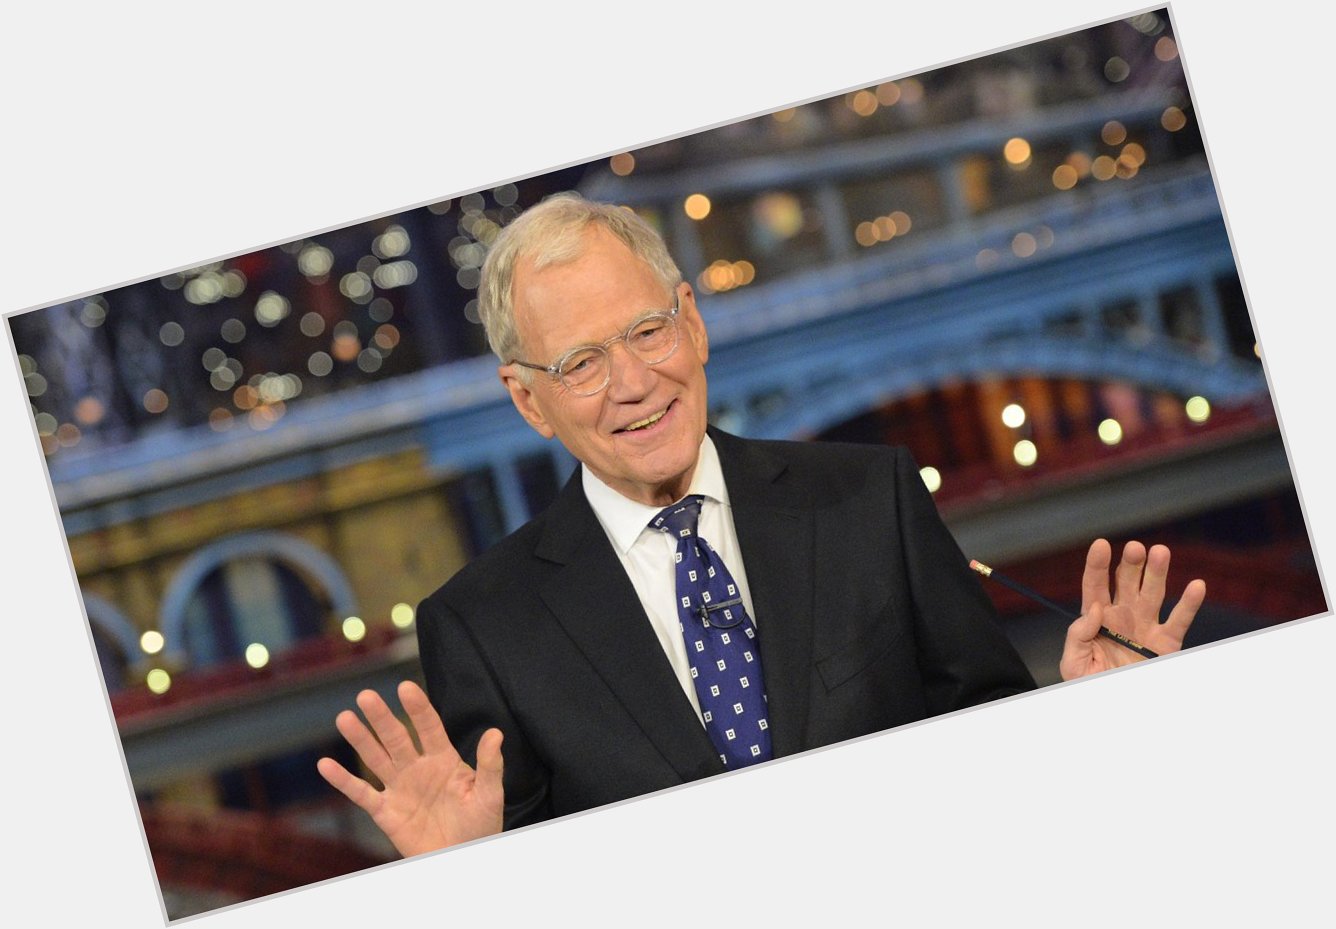 Happy birthday David Letterman! Look back at our 2015 feature on the comedian  